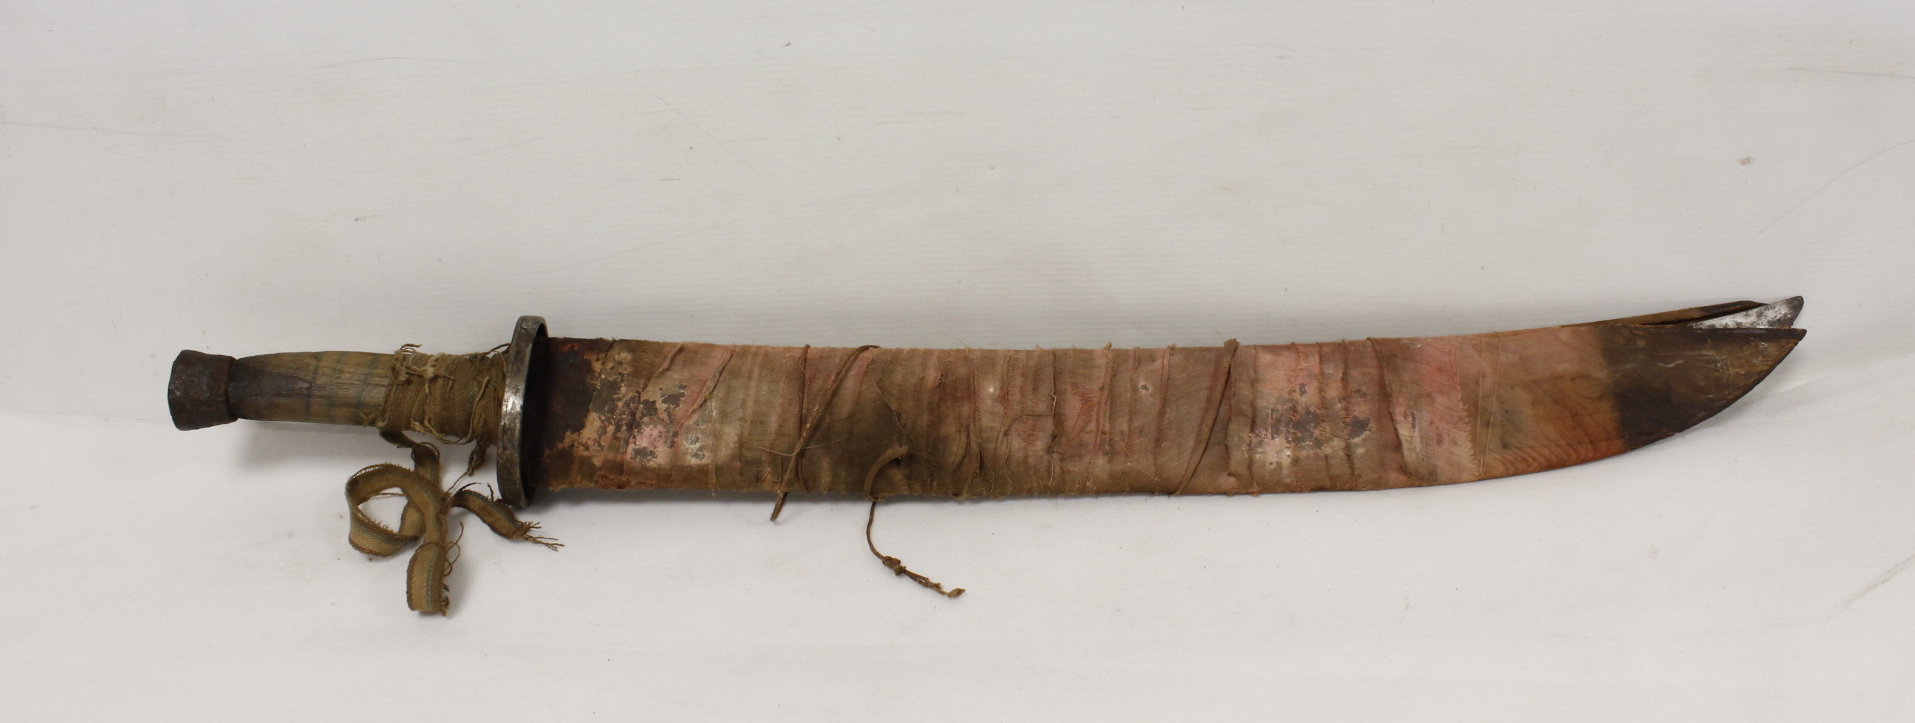 Antique Chinese Falchion type sword in cloth bound wooden scabbed. Inscription to blade, iron